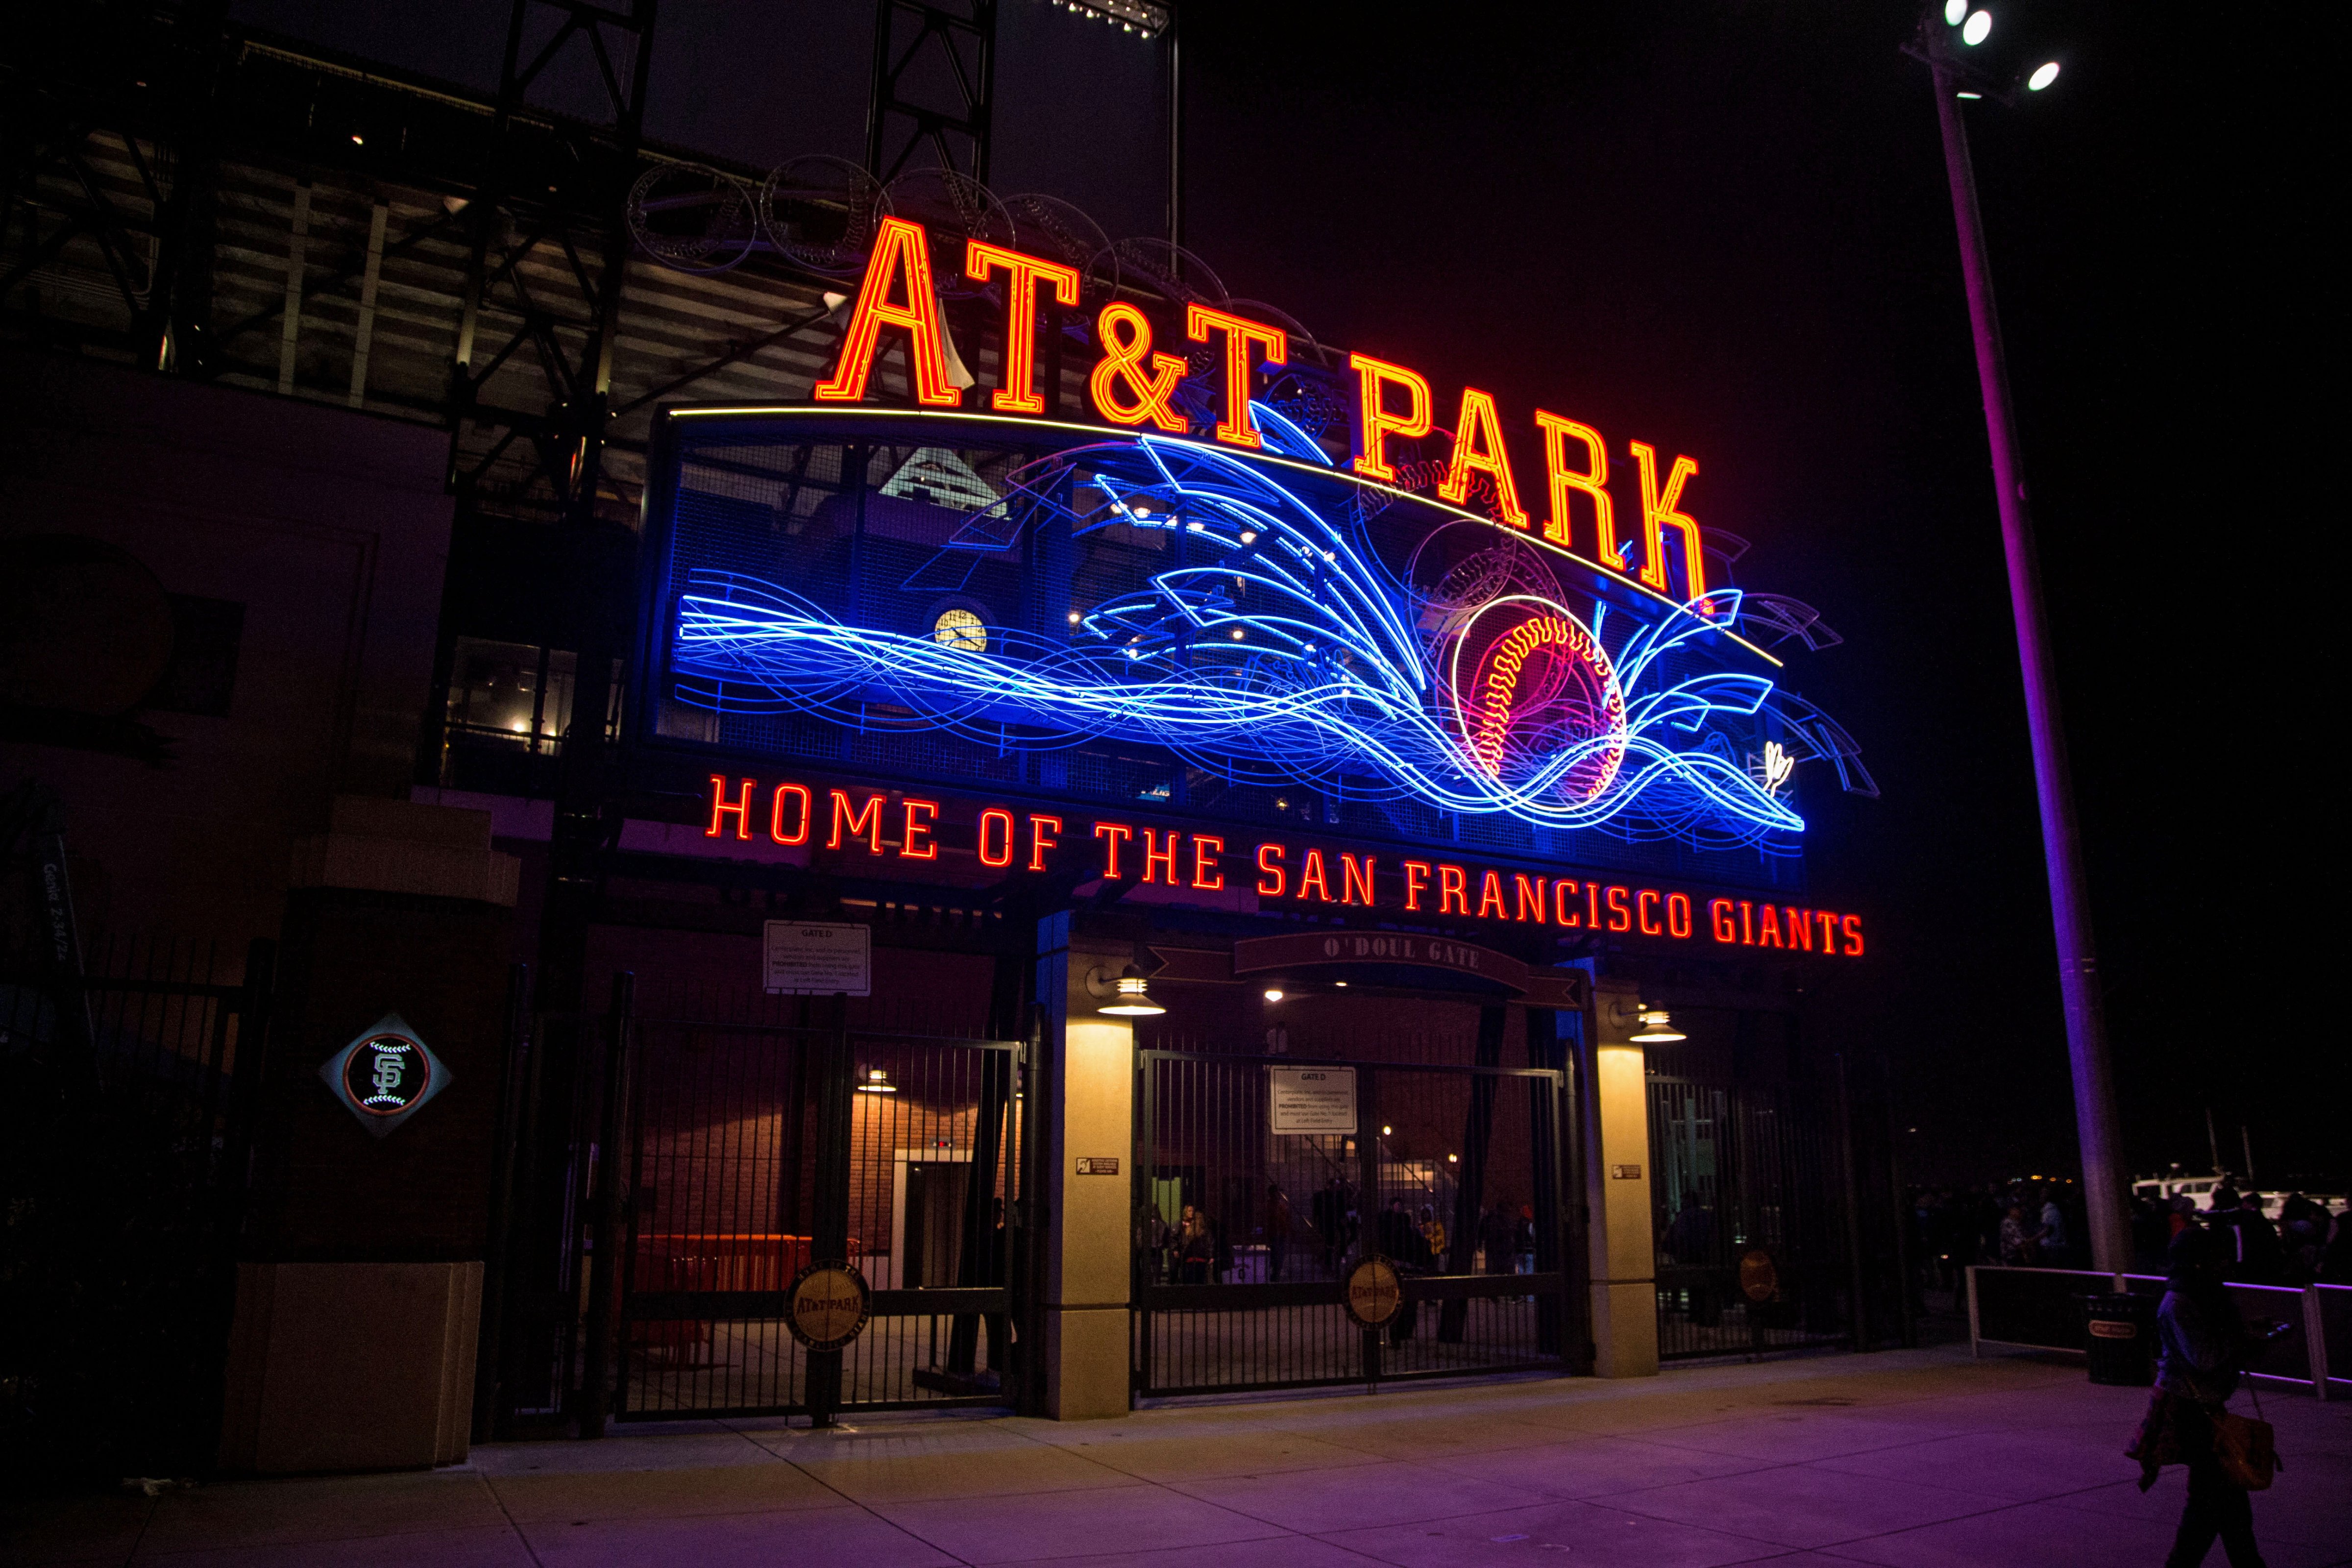 A general view of the exterior of AT&T Park following the game between the San Francisco Giants and the Minnesota Twins on May 23, 2014 in San Francisco, California. (Brace Hemmelgarn—Getty Images)